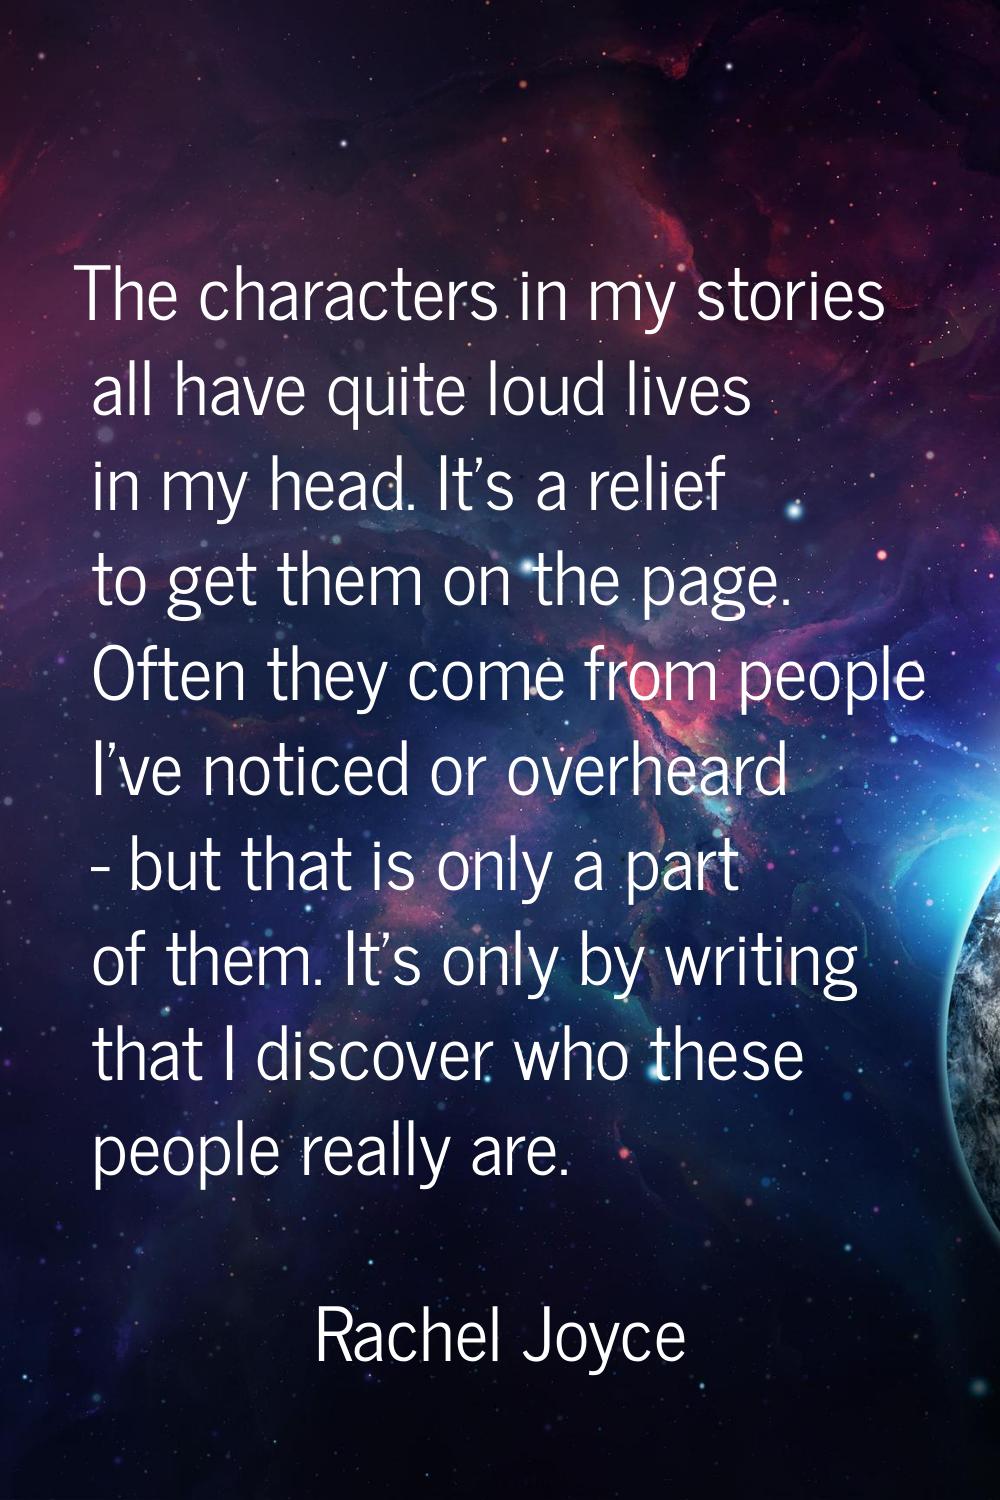 The characters in my stories all have quite loud lives in my head. It's a relief to get them on the